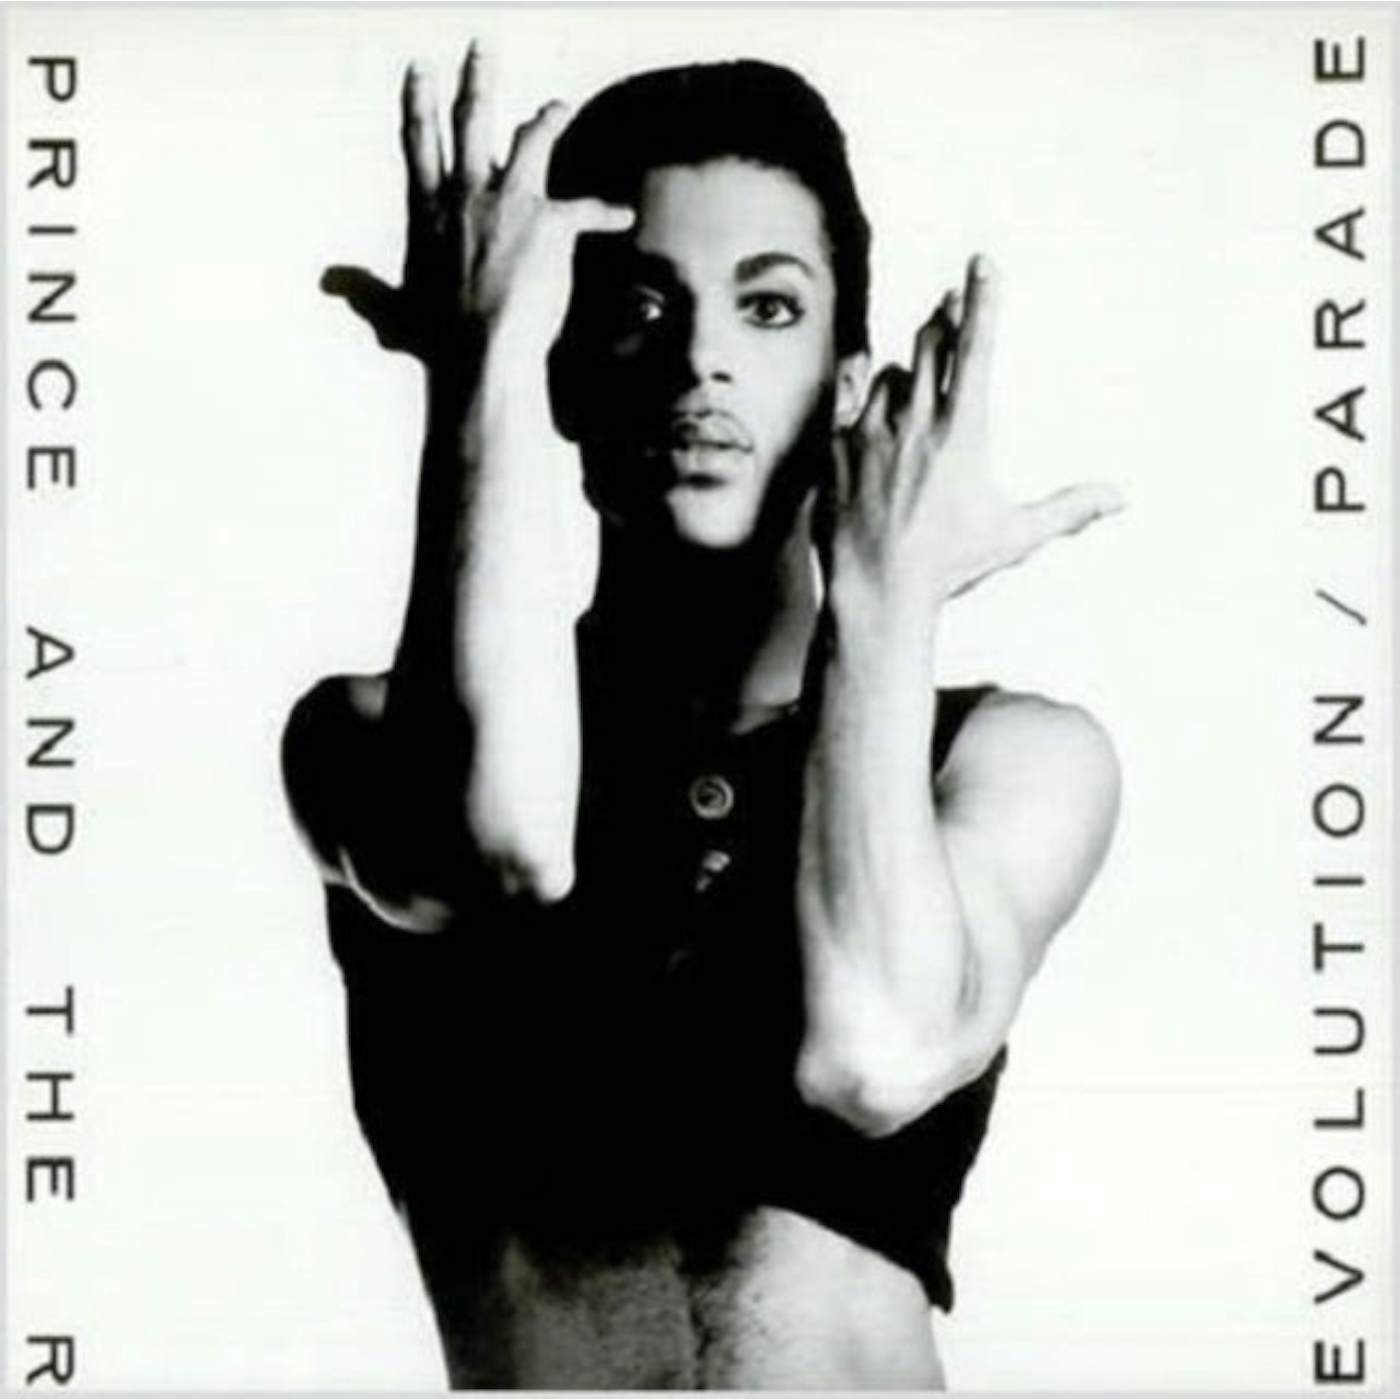 Prince LP Vinyl Record - Parade (Music From The Motion Picture Under The Cherry Moon)